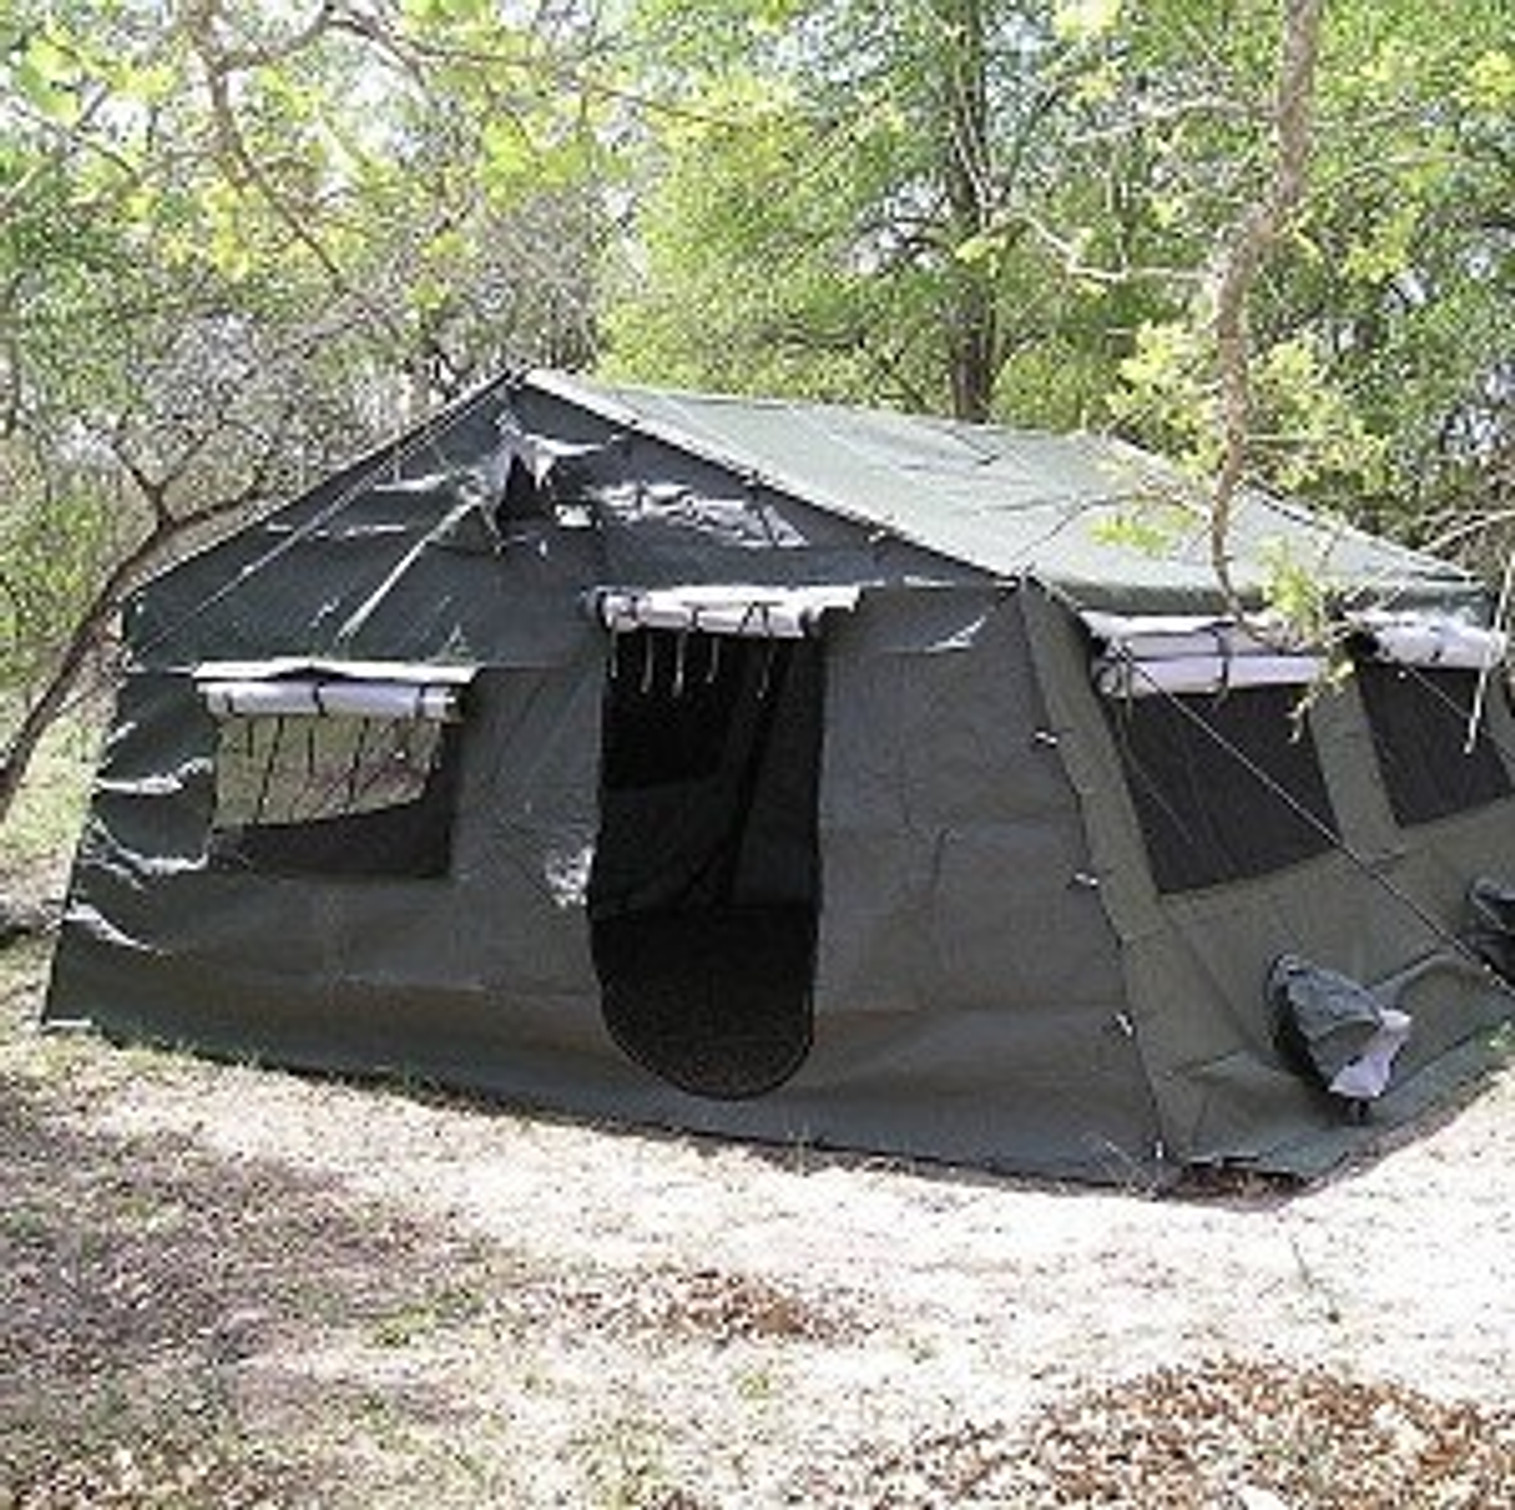 GP Expandable Frame Type Tent - U.S. Armed Forces  16'x16'